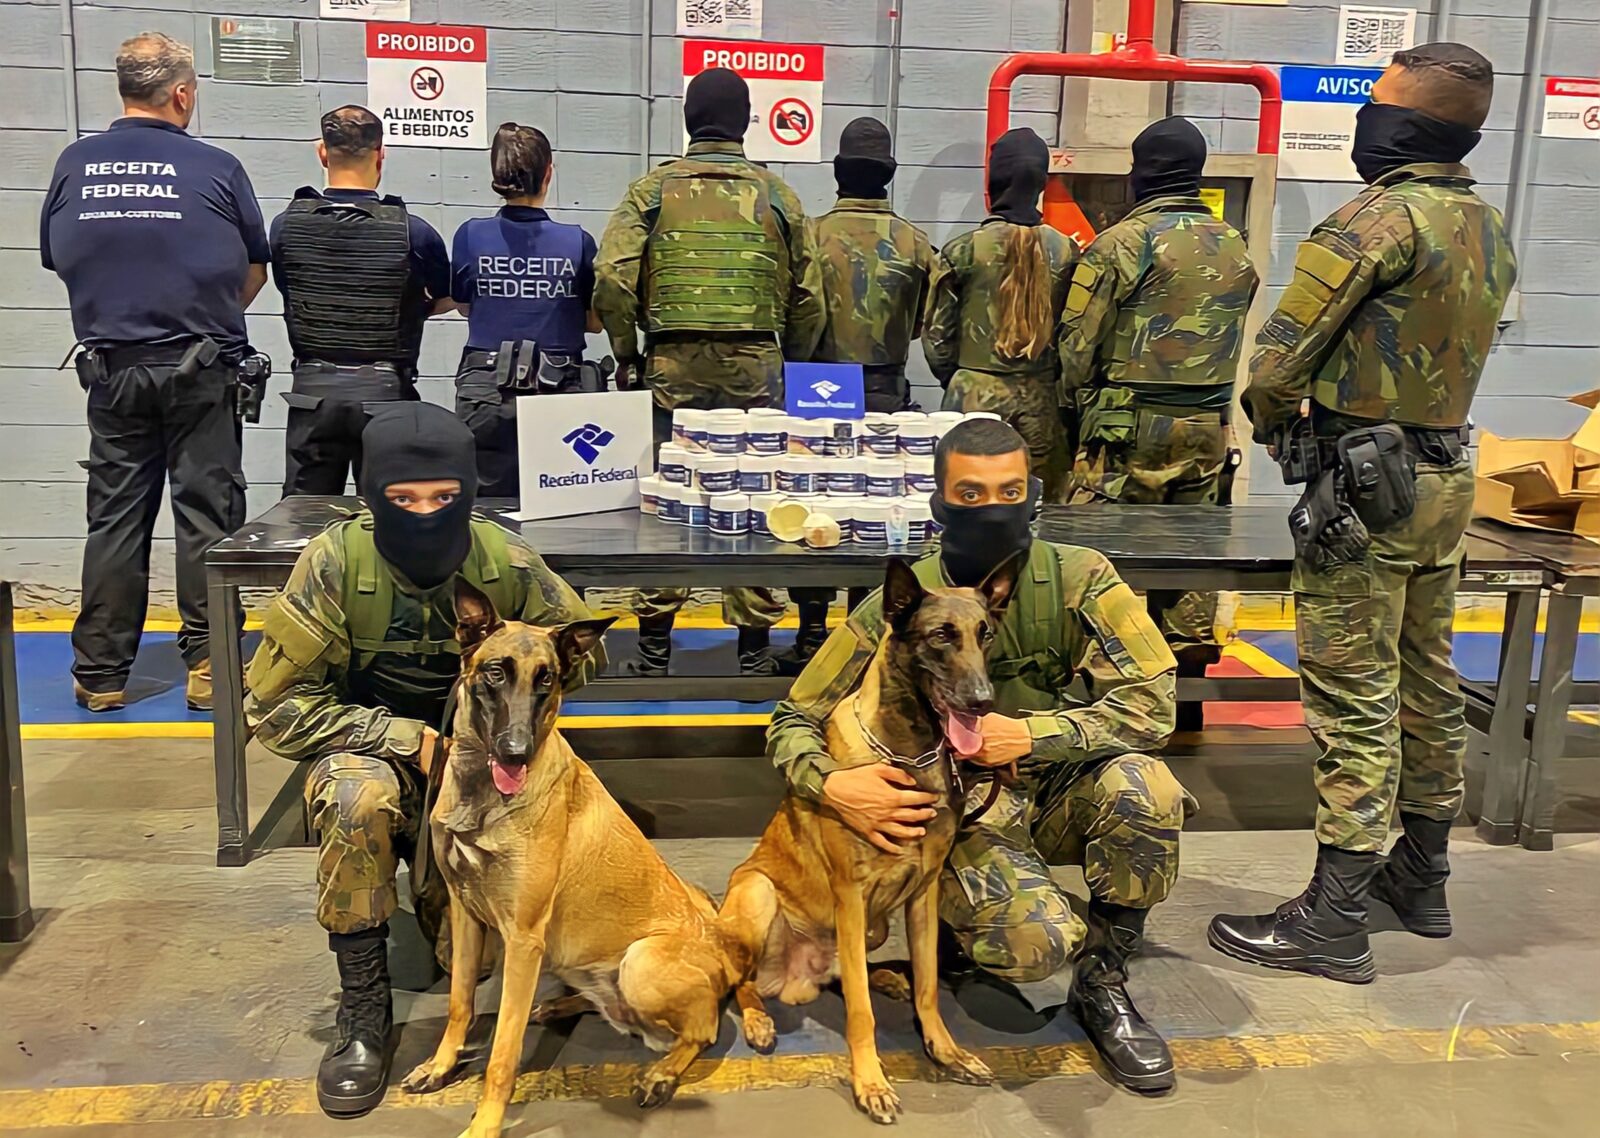 Operation Air Bridge seizes 35 kg of illegal goods at Guarulhos Airport and 1.5 kg at Galeão Airport